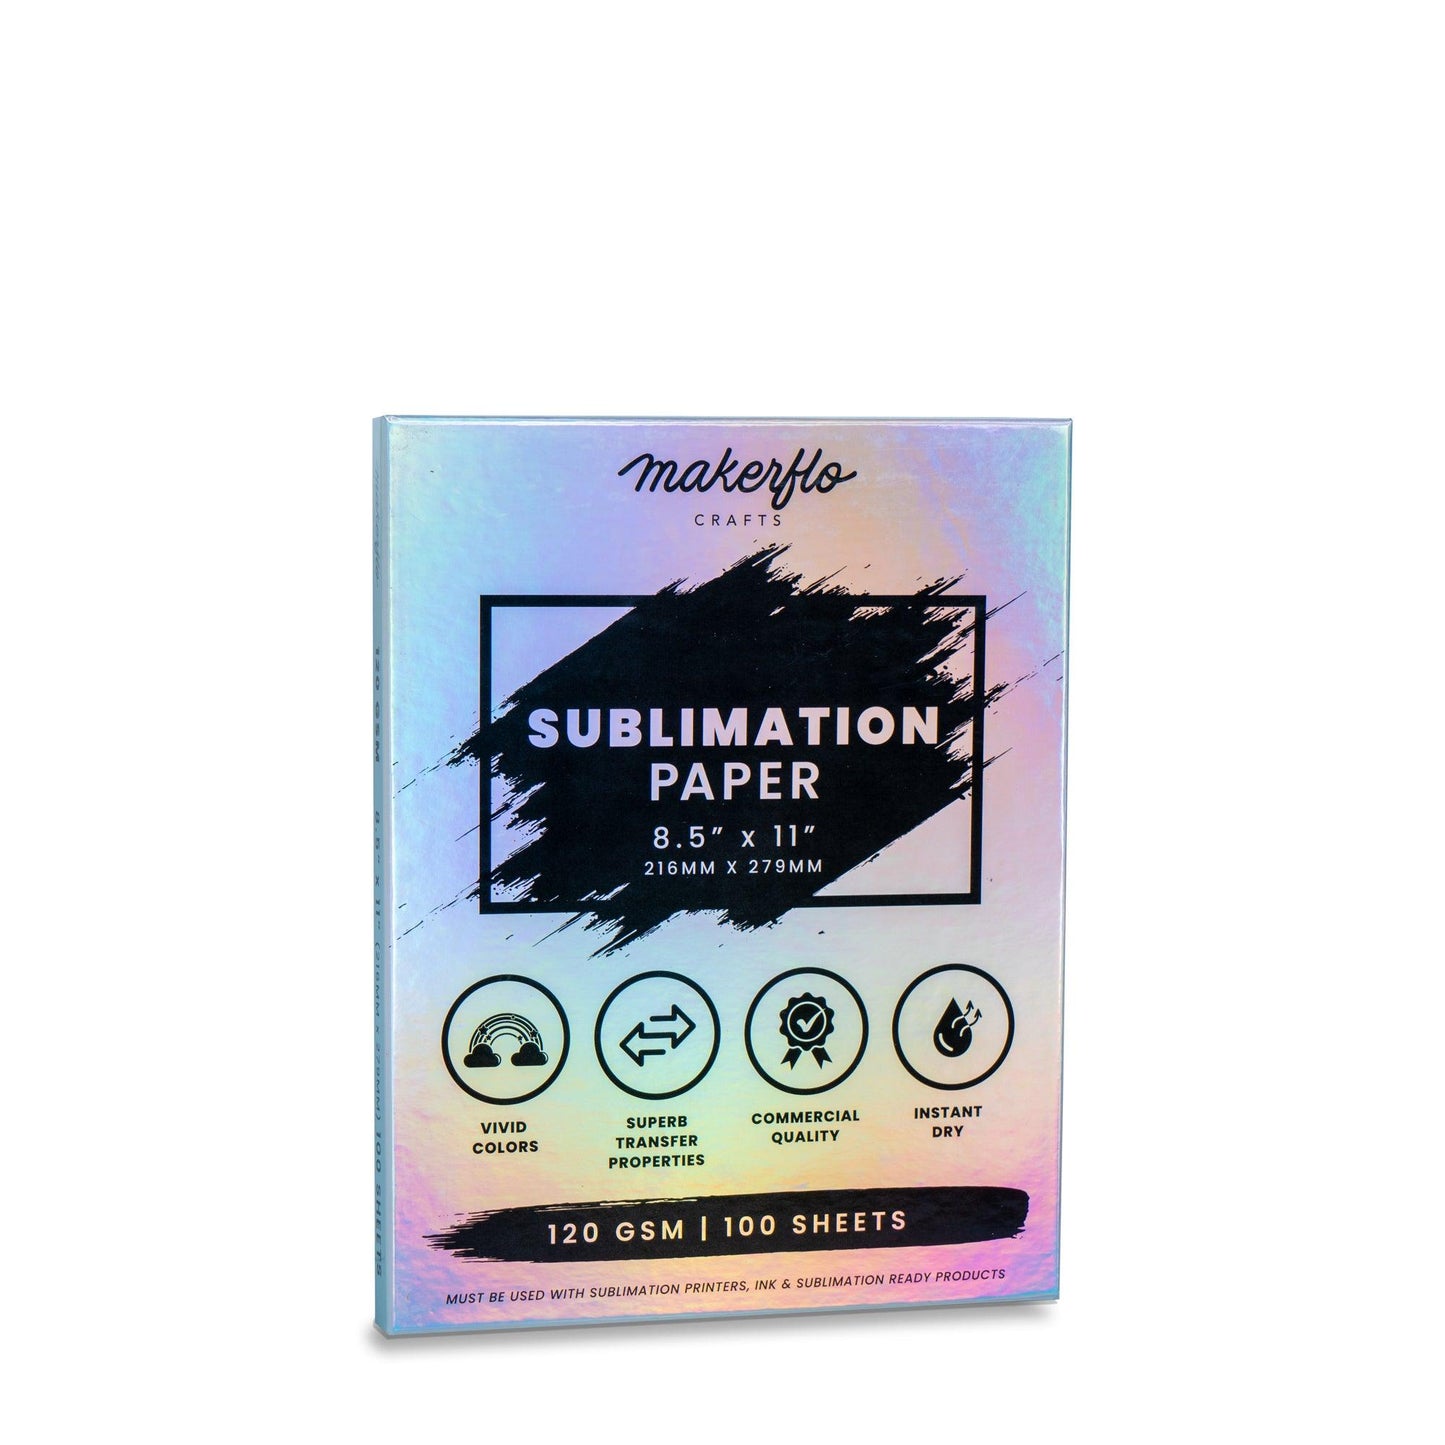 Makerflo Sublimation Paper (8.5x14, inches)